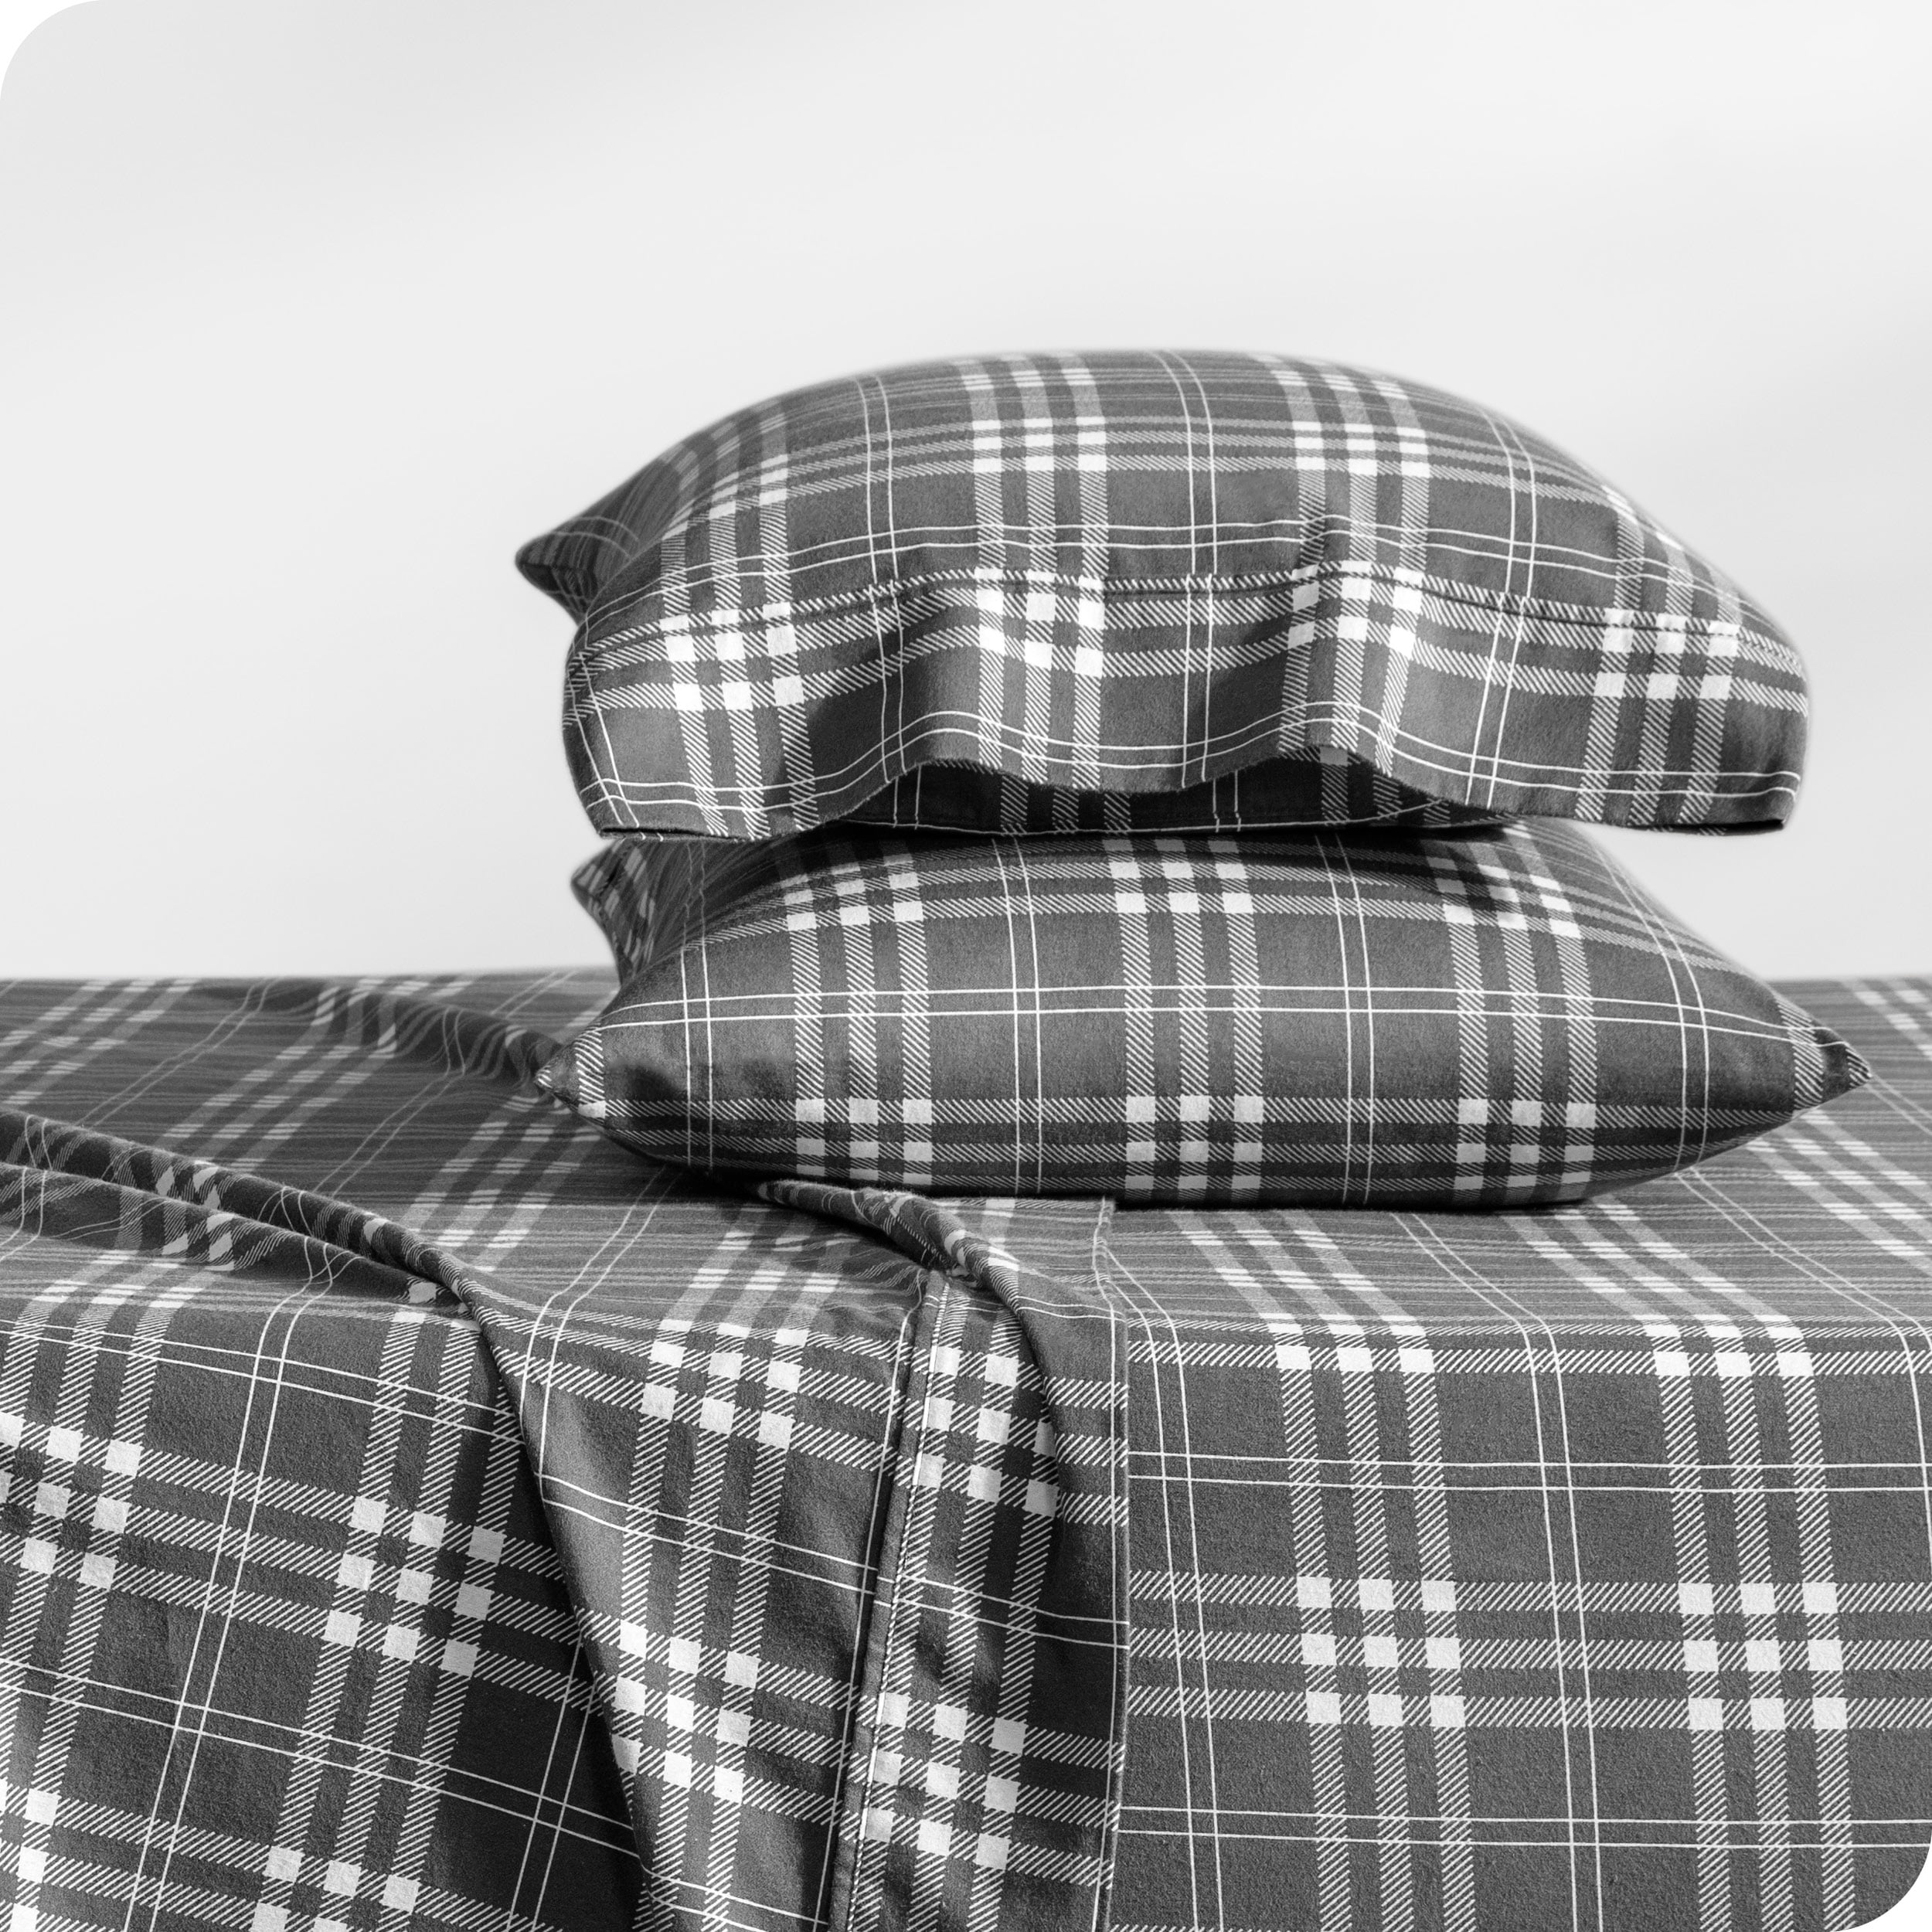 Details about   Thermal Flannelette 100% Brushed Cotton Sheets SET 32cm Deep Warm Cosy All Sizes 